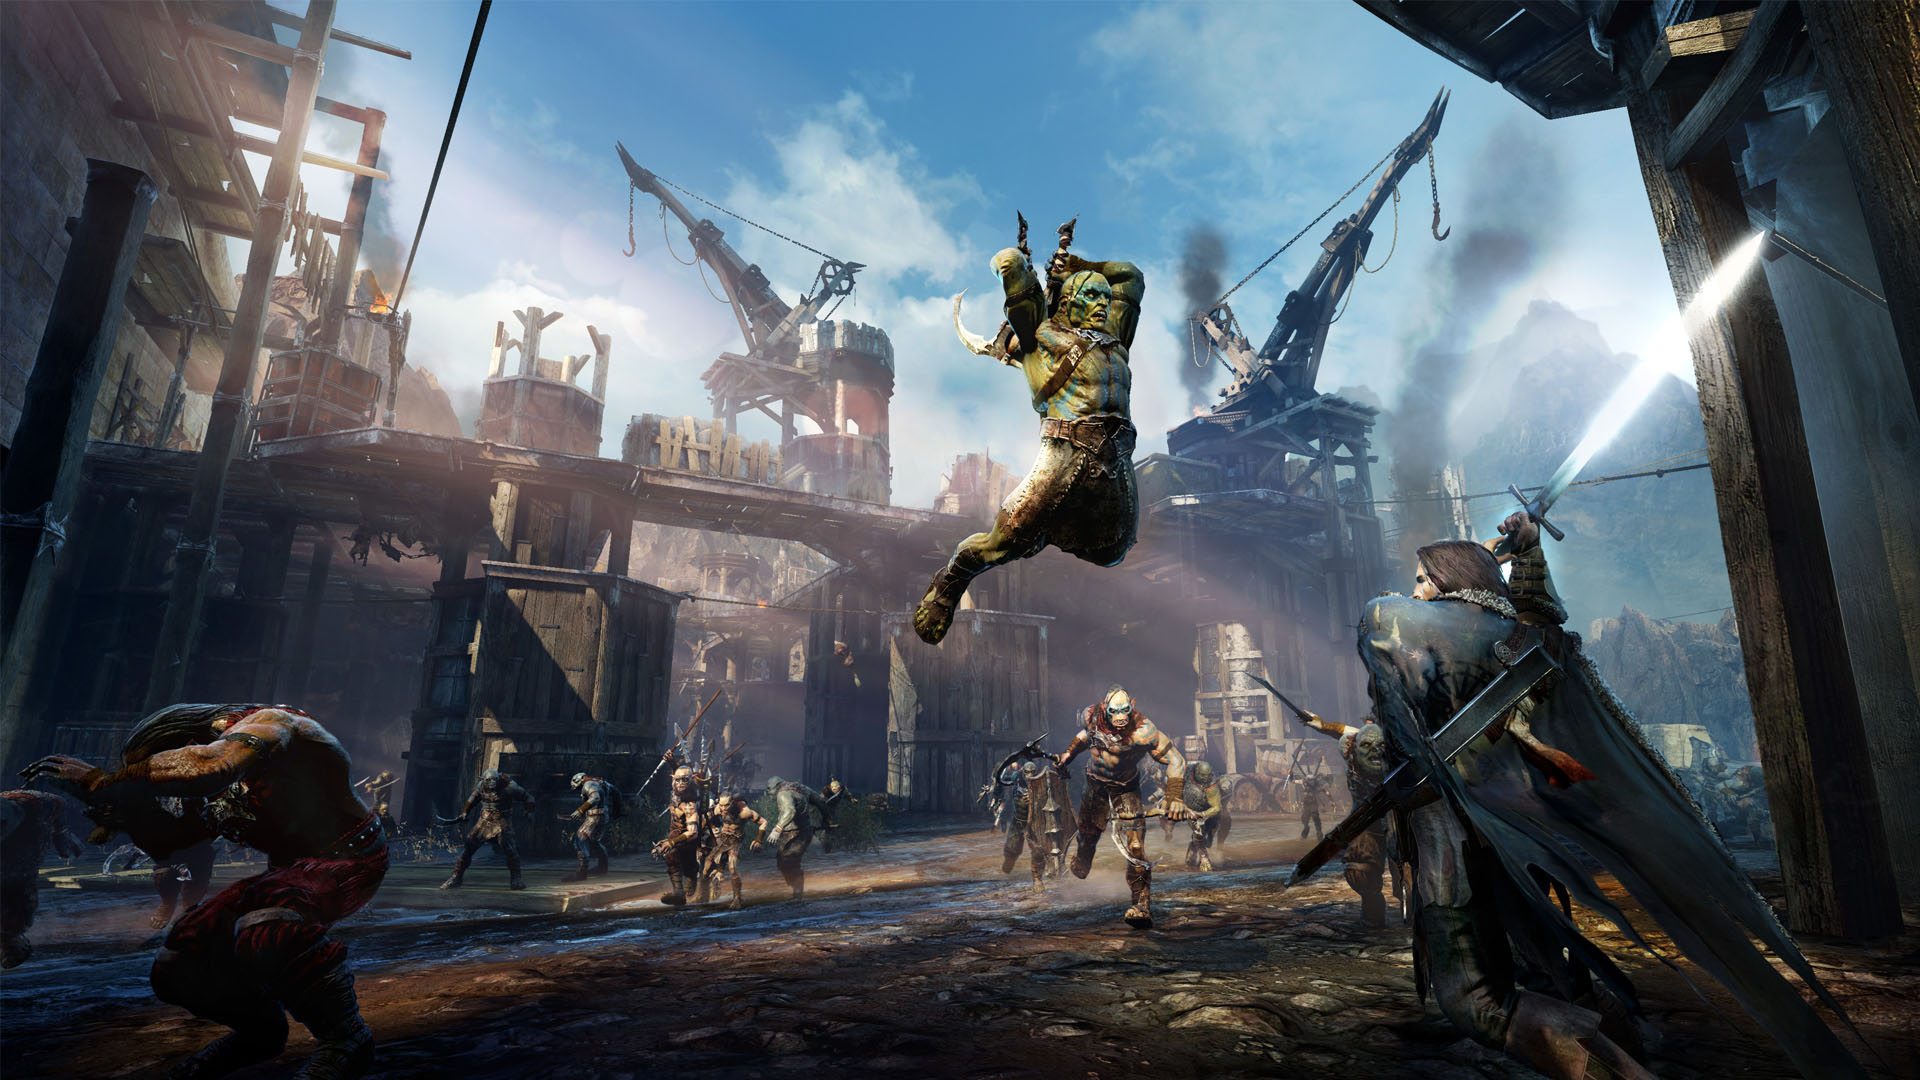 Middle-earth: Shadow of Mordor - Lord of the Hunt - Metacritic